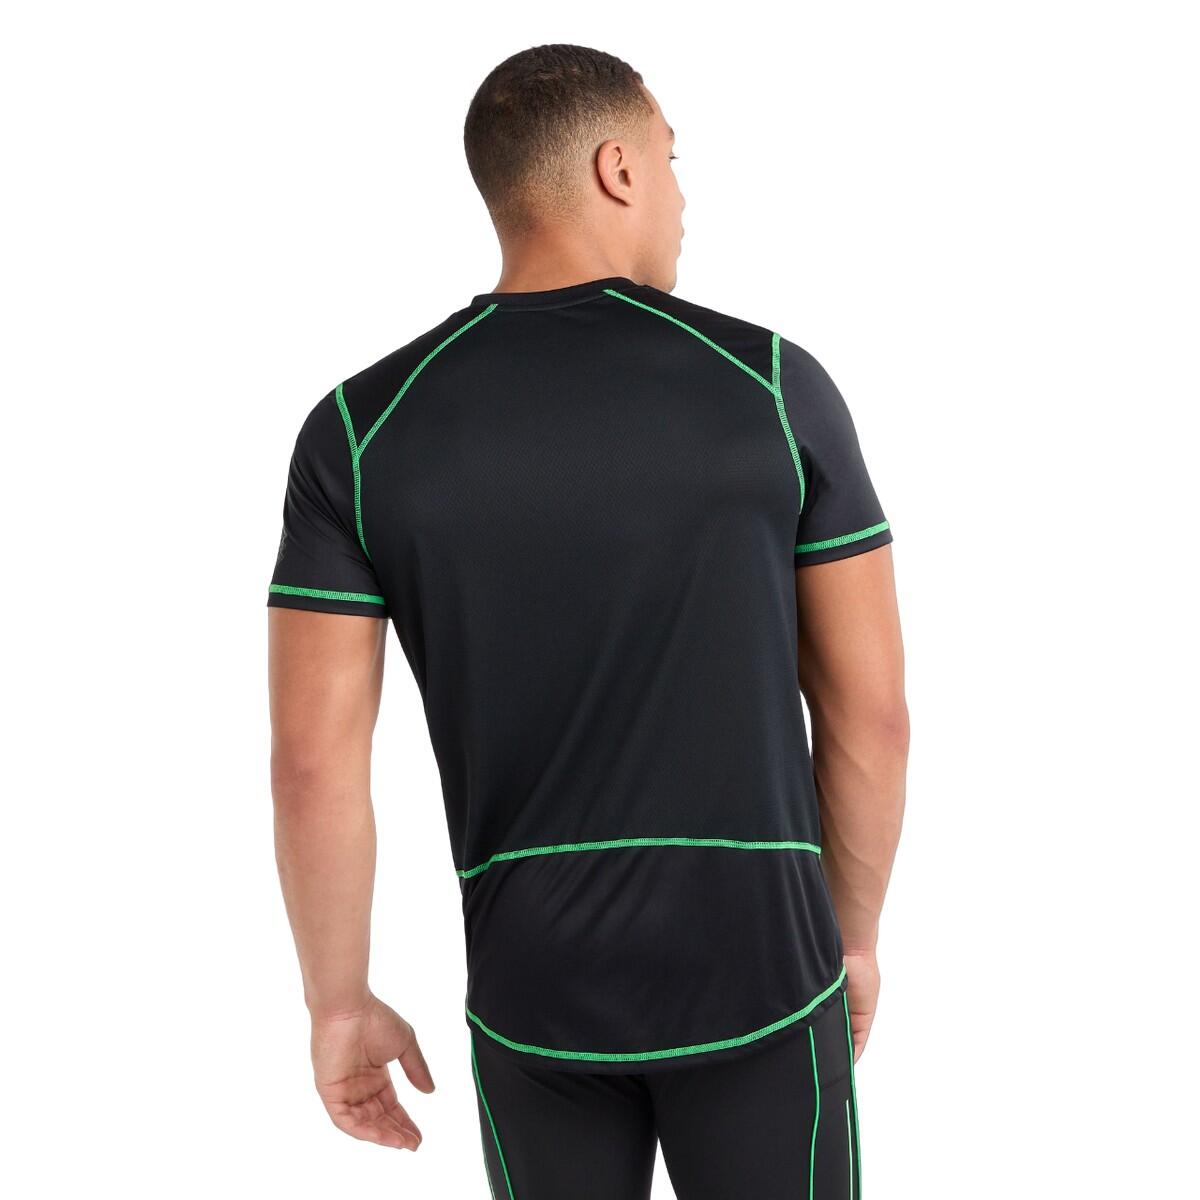 Mens Pro Polyester Training TShirt (Black/Andean Toucan) 2/4